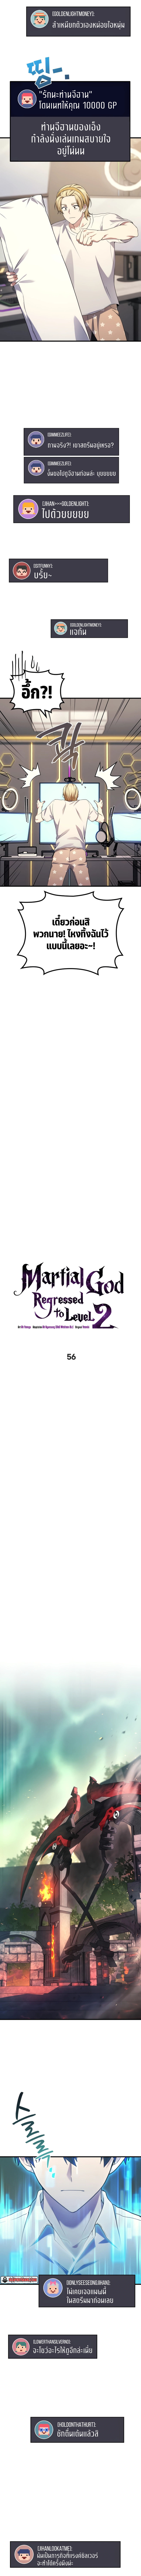 Martial God Regressed to Level 2 56 (2)